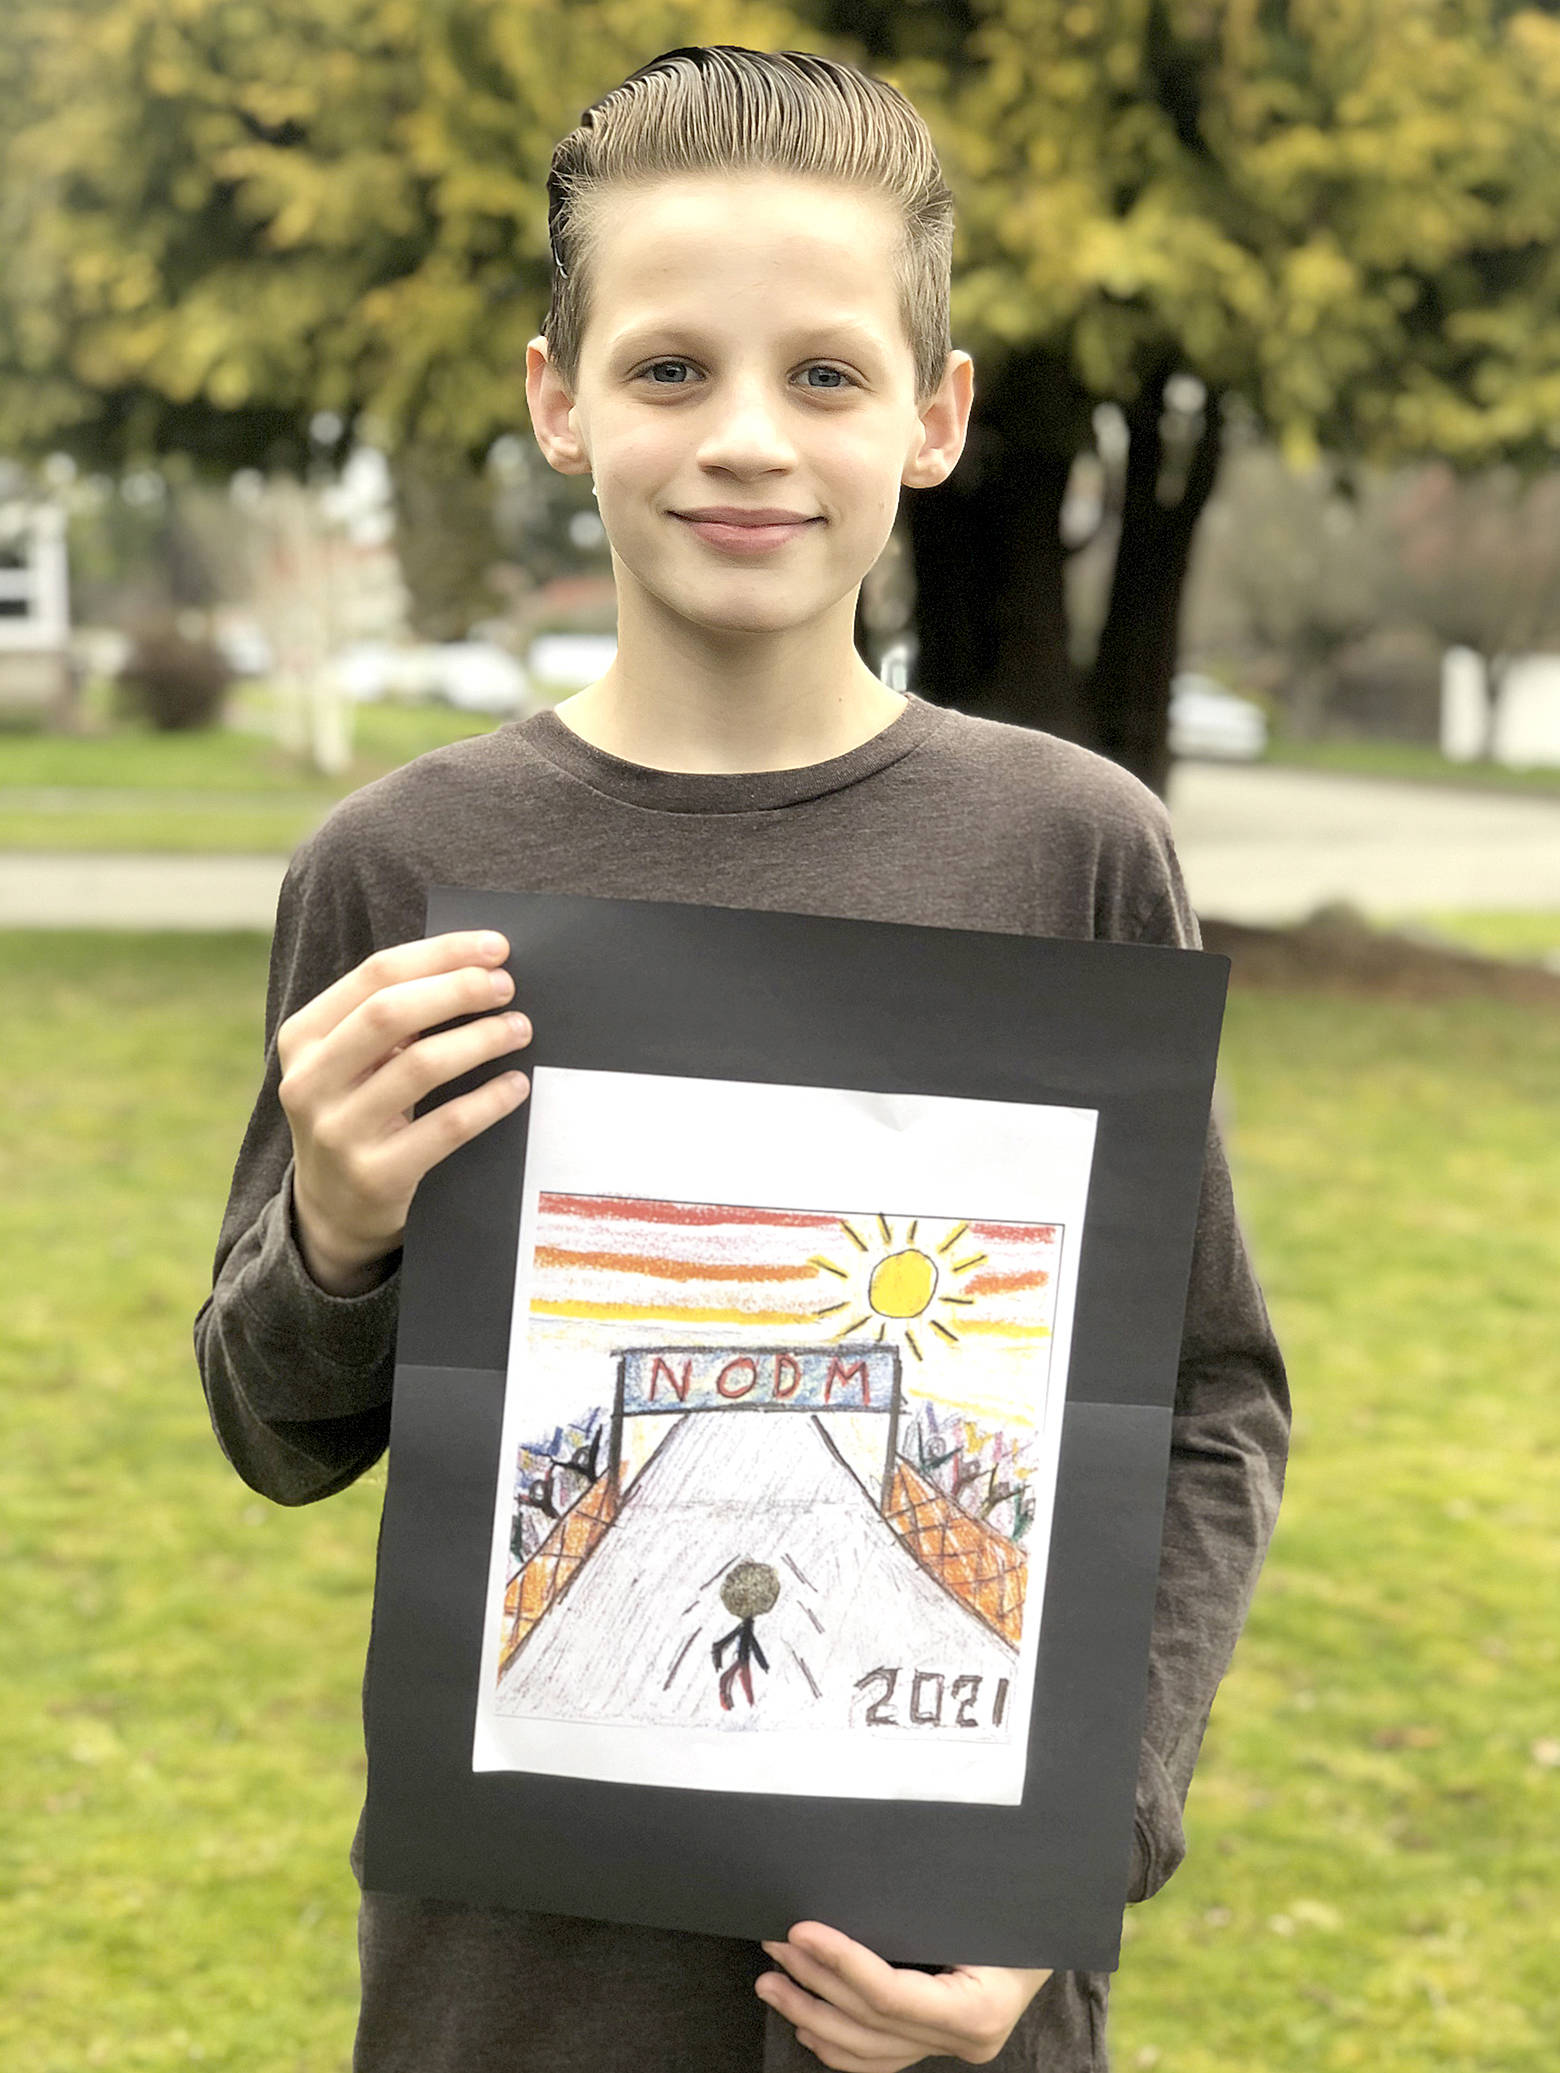 North Olympic Discovery Marathon
John Ruddell, 12, is the grand prize winner of the North Olympic Discovery Marathon kids medal design contest.